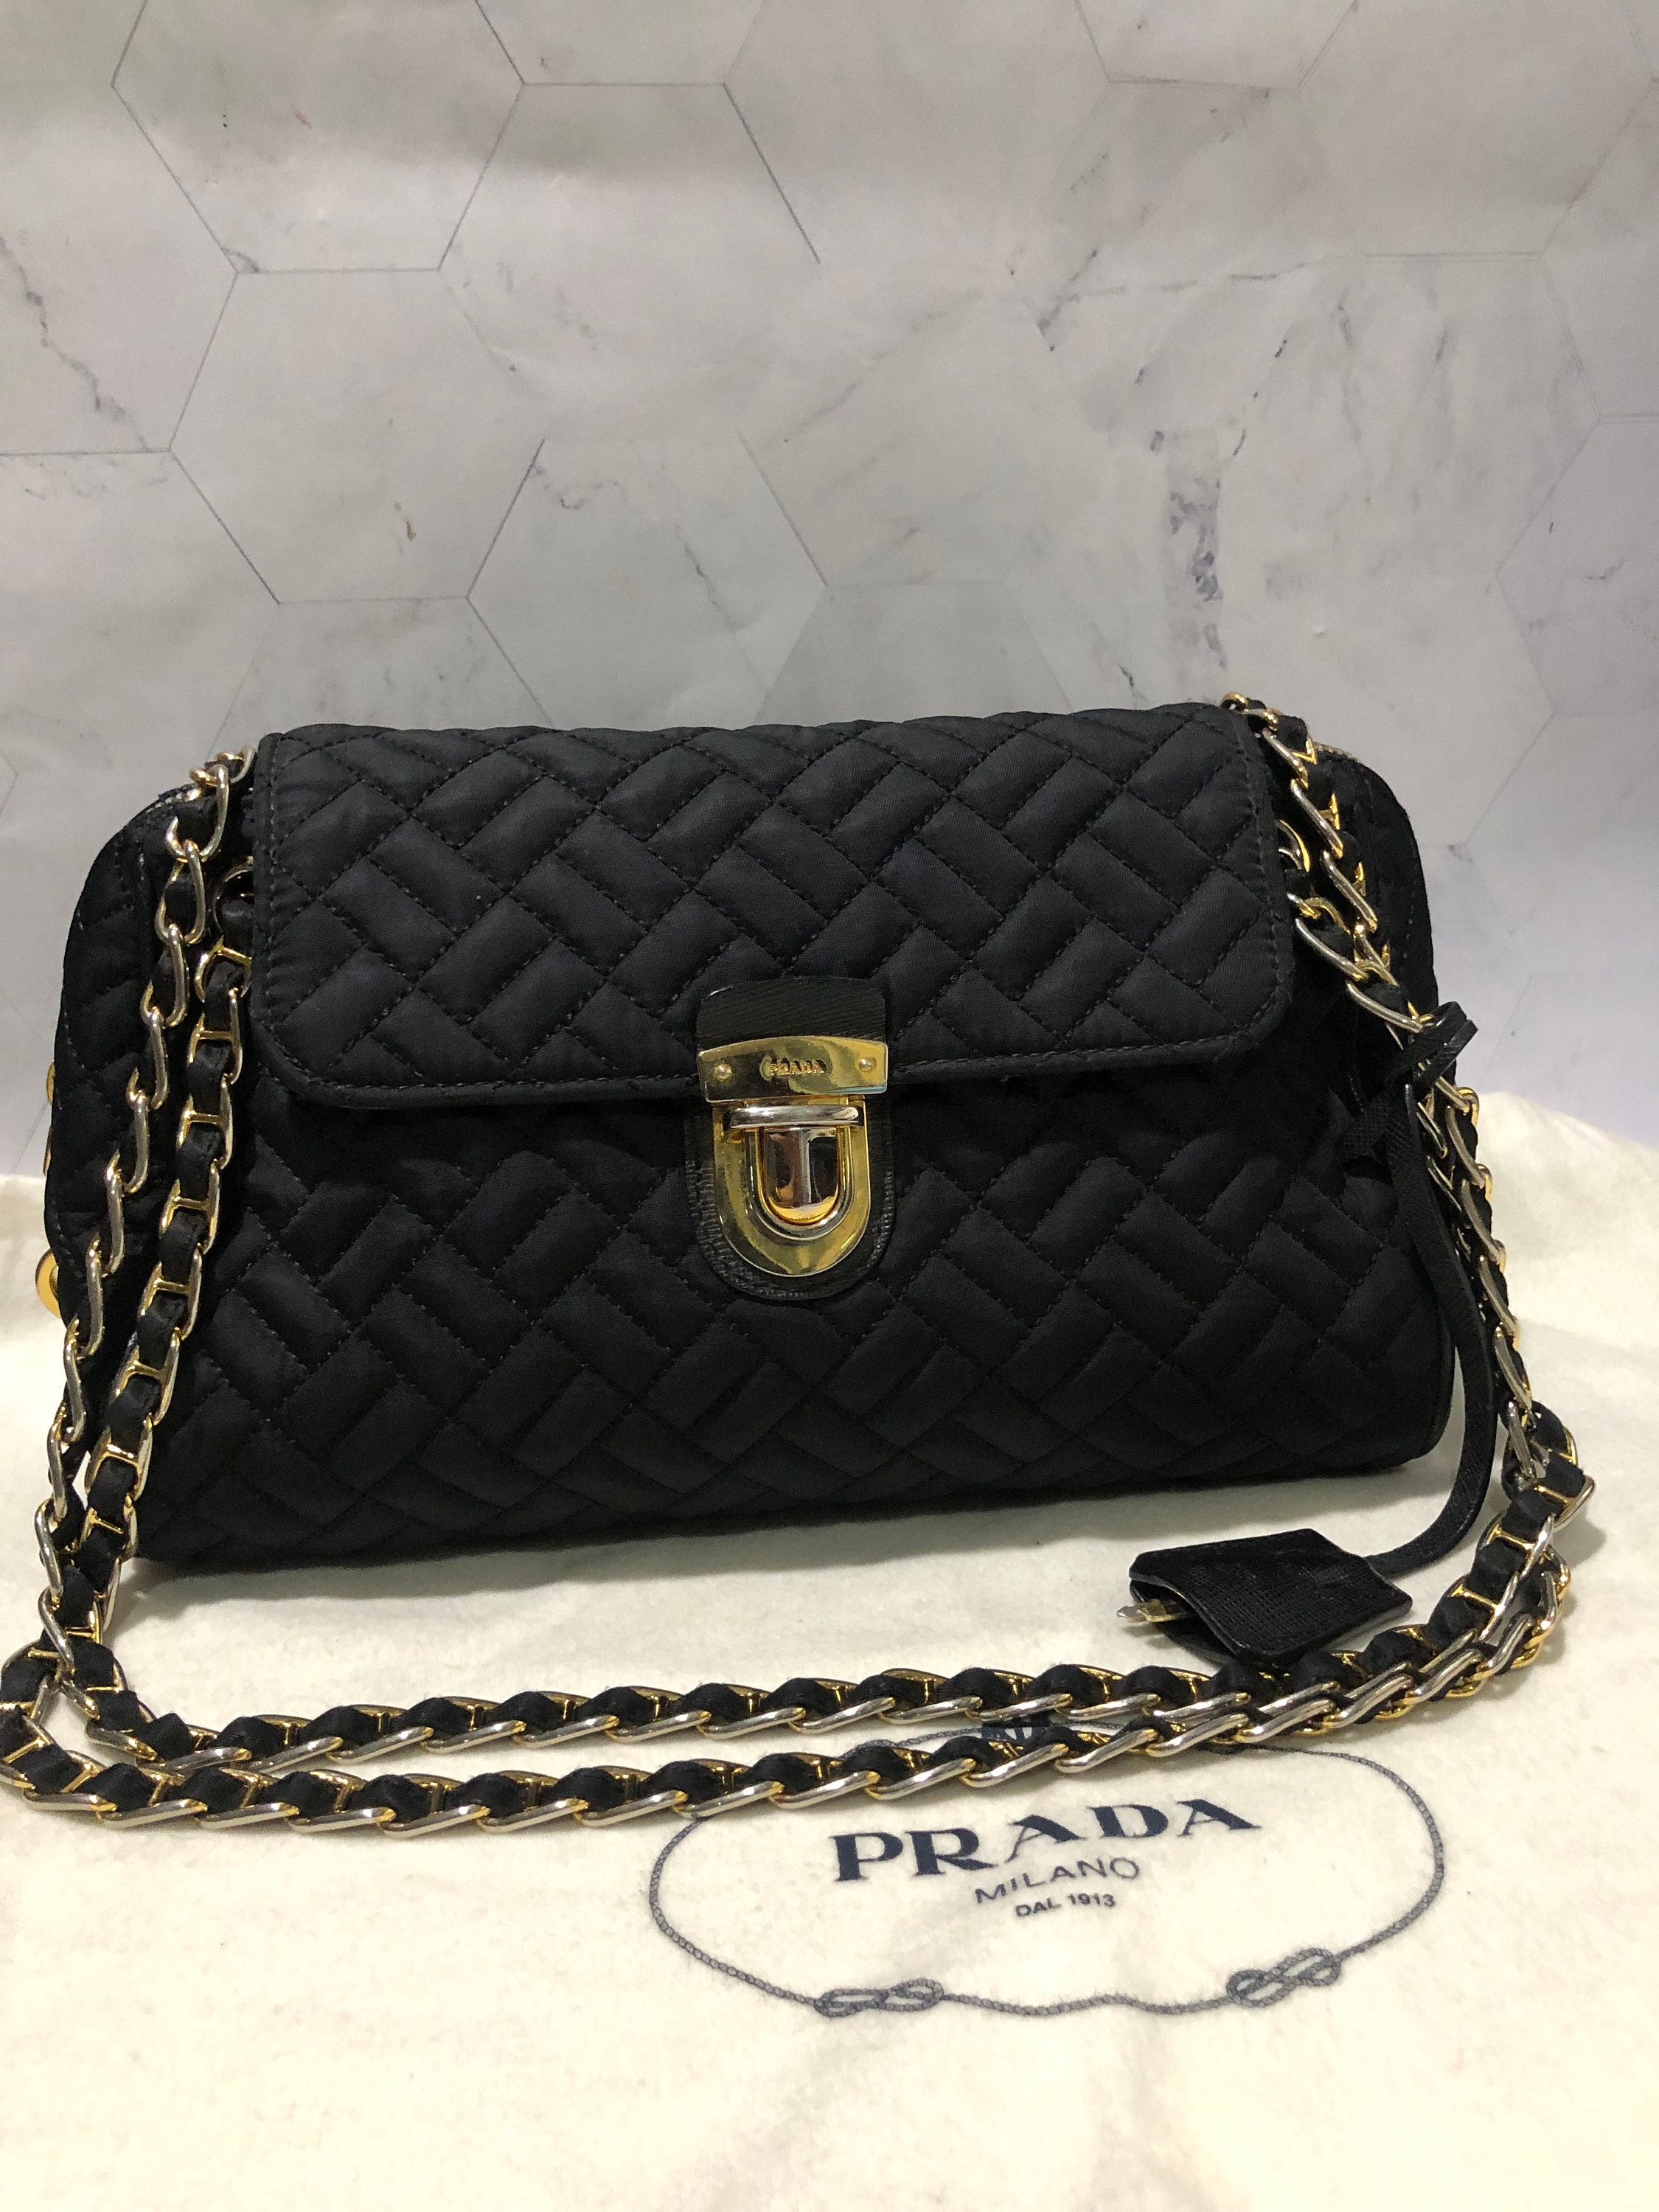 Authentic Prada Beige Leather Clutch With Optional Gold Chain